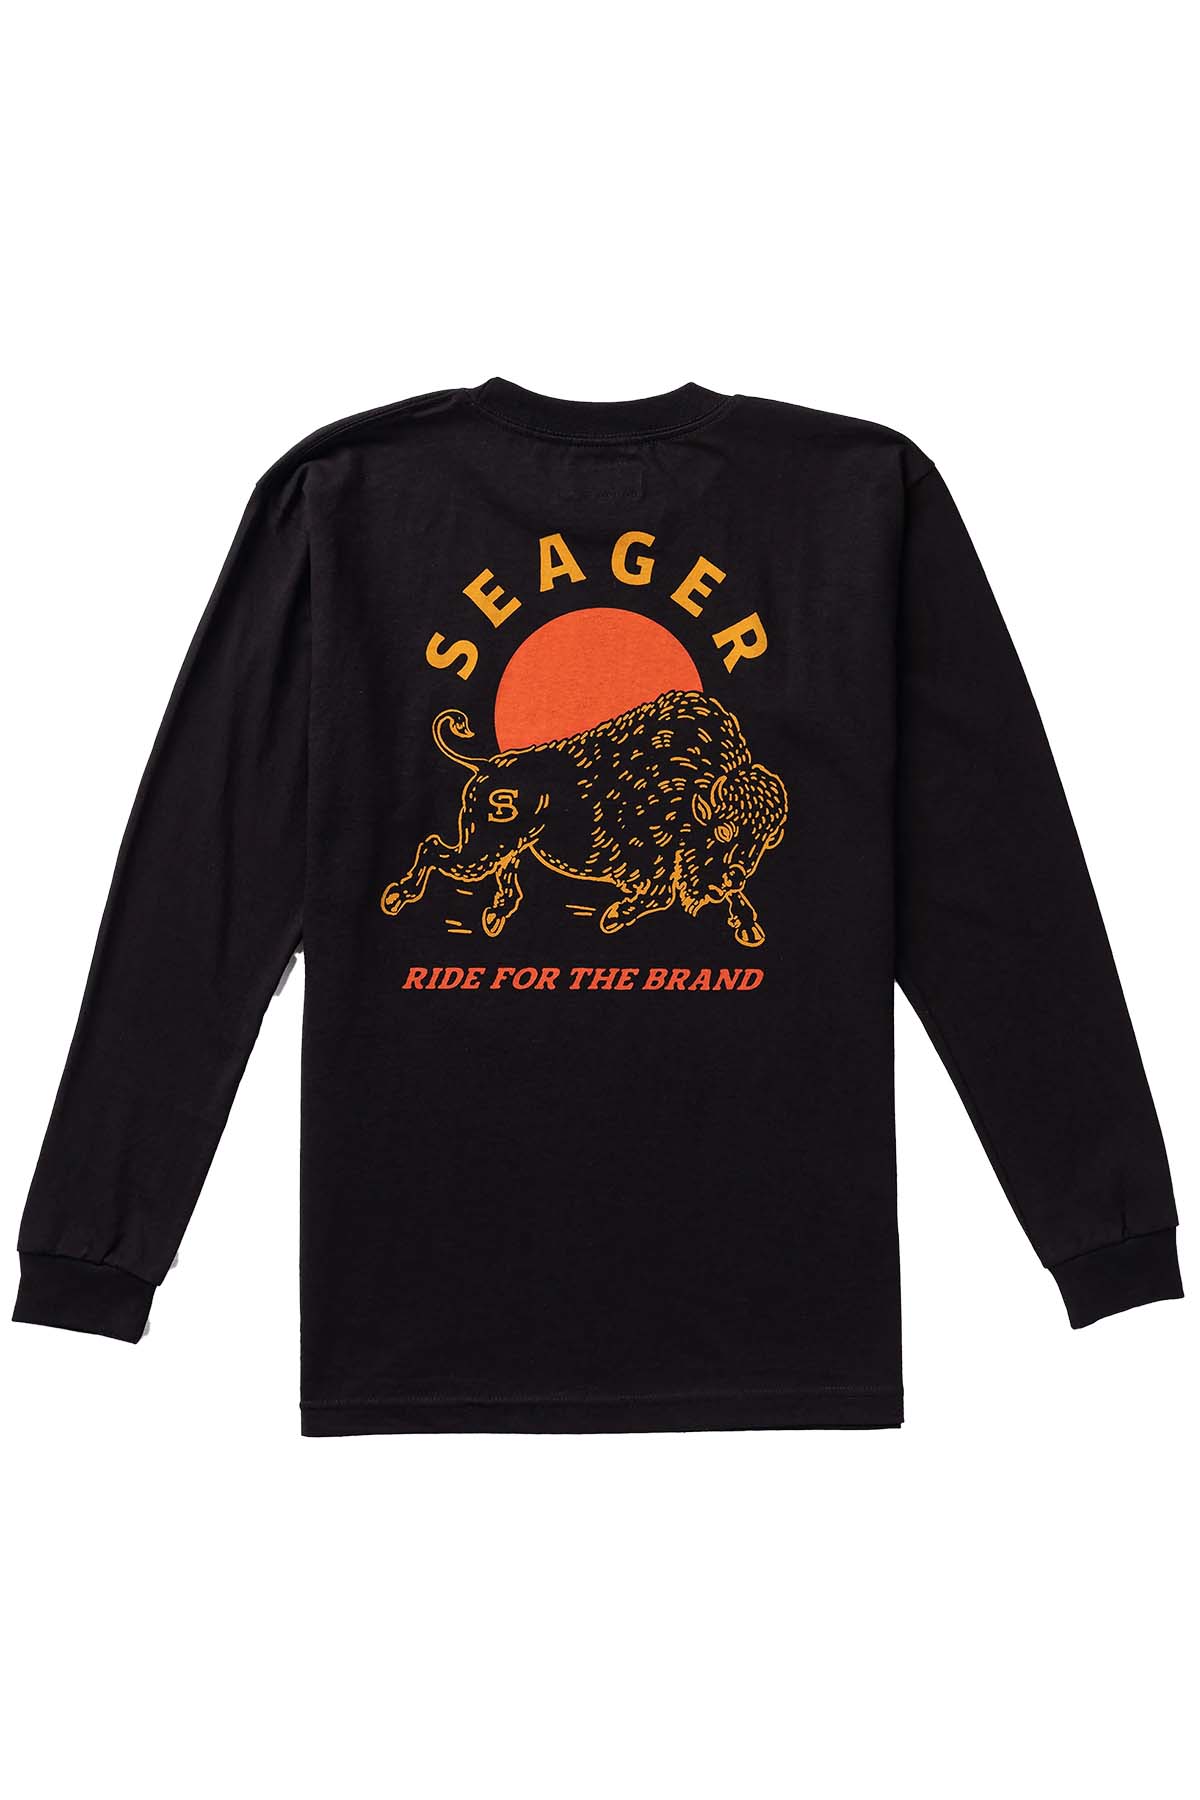 Seager - Ride for the Brand LS Tee - Black - Back